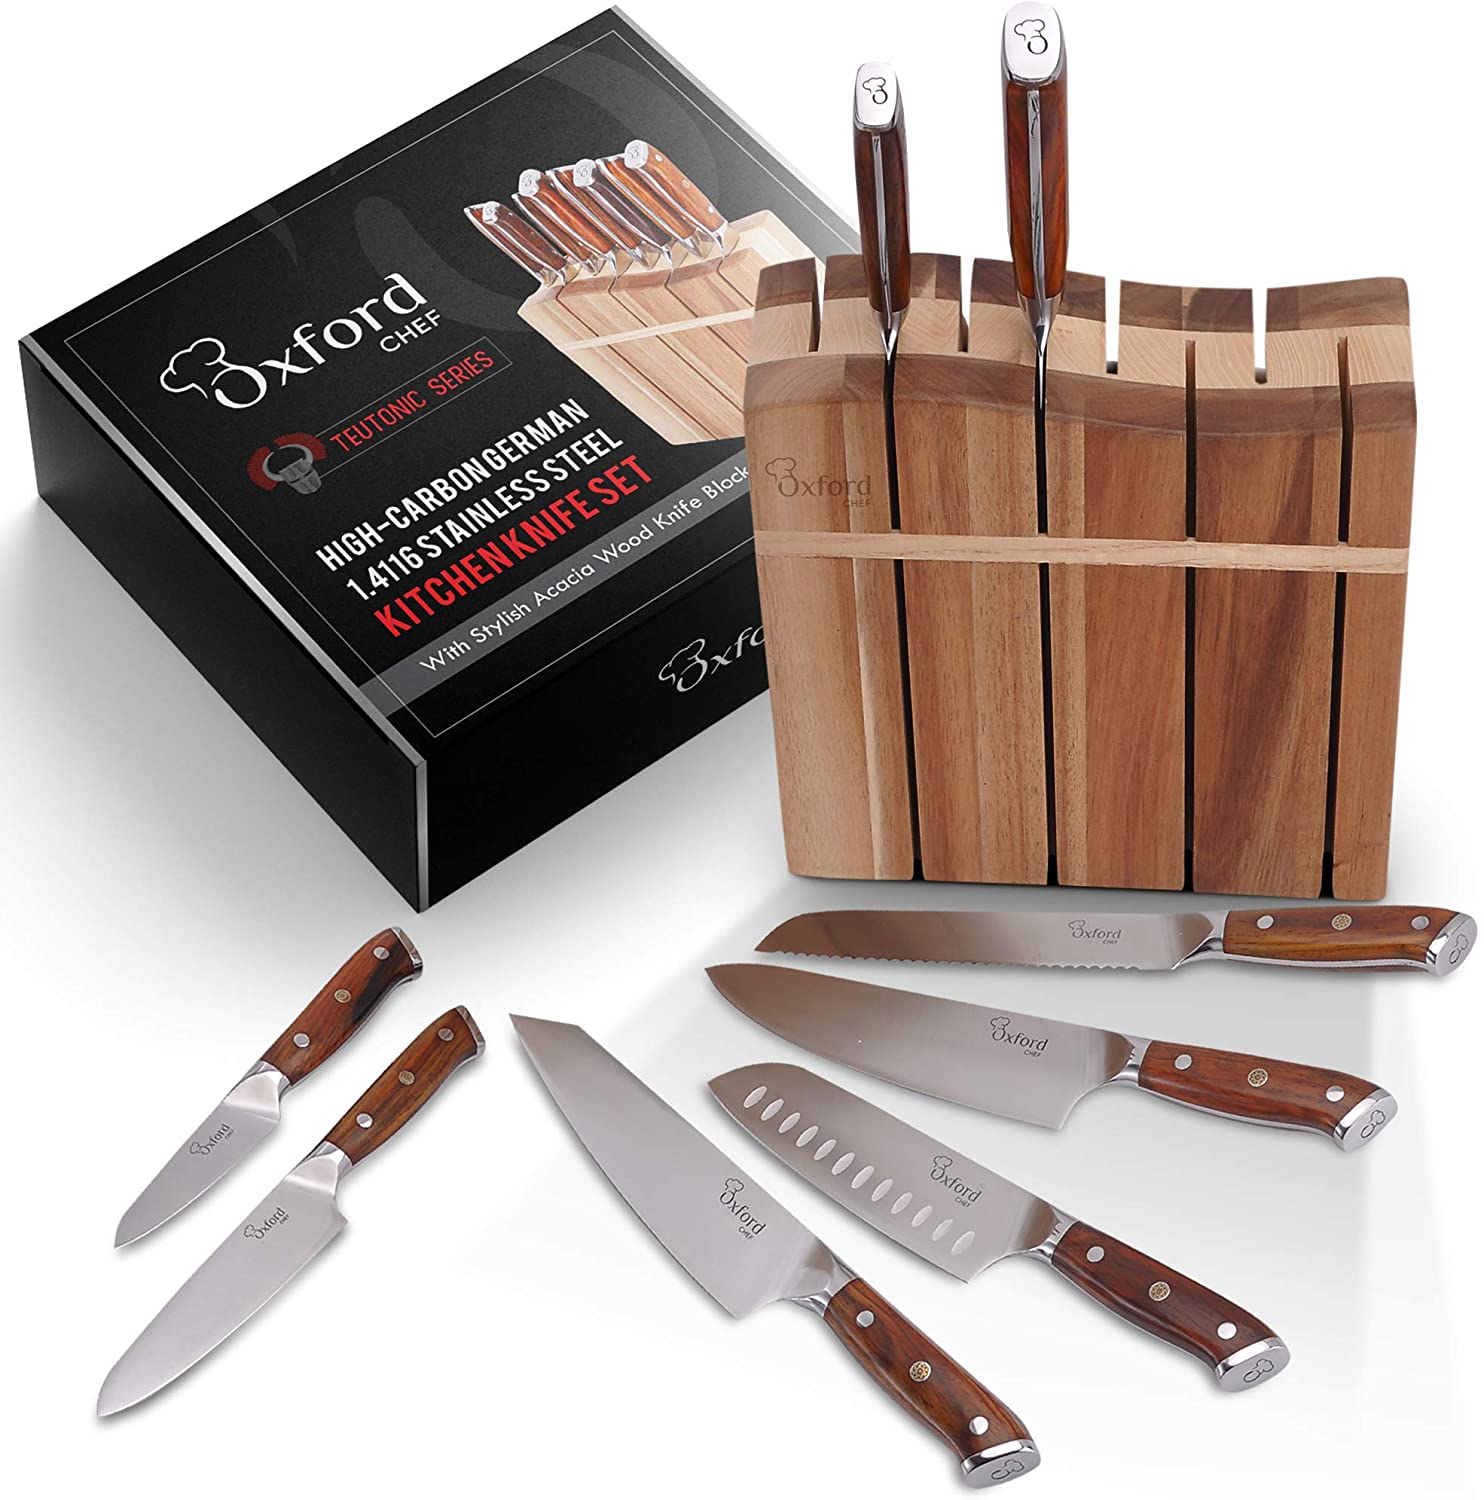 Kitchen Knife Set With Block: 8 Piece German 1.4116 High-Carbon Stainless Steel Knives - Full-Tang, Ergonomic Sandalwood Handles W/Stylishly Designed Acacia Wood Knife Block